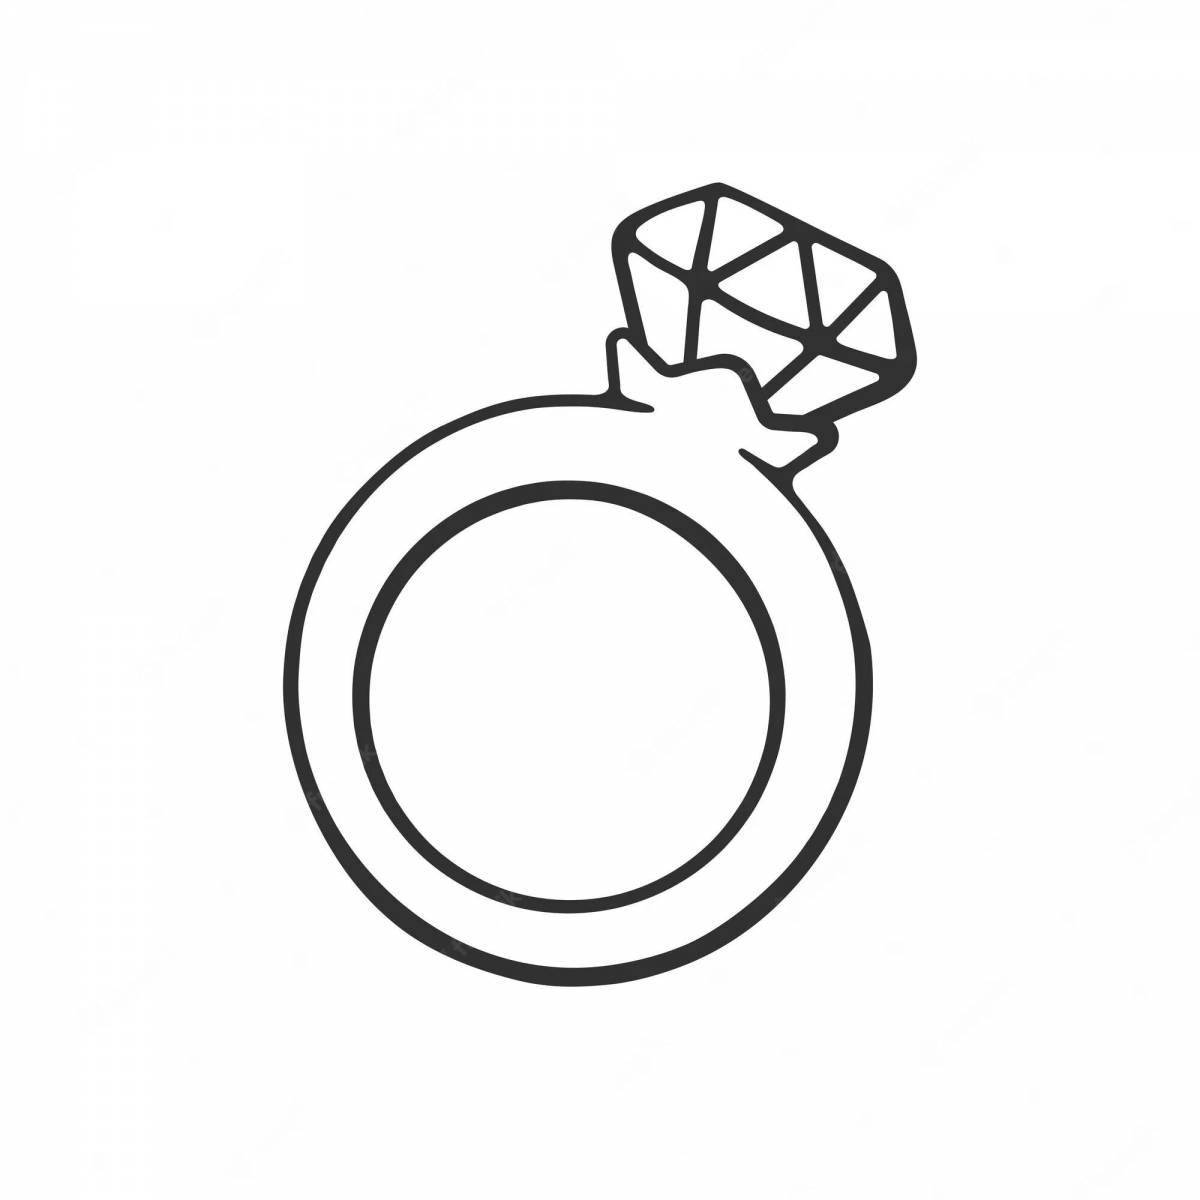 Awesome ring coloring page for preschoolers